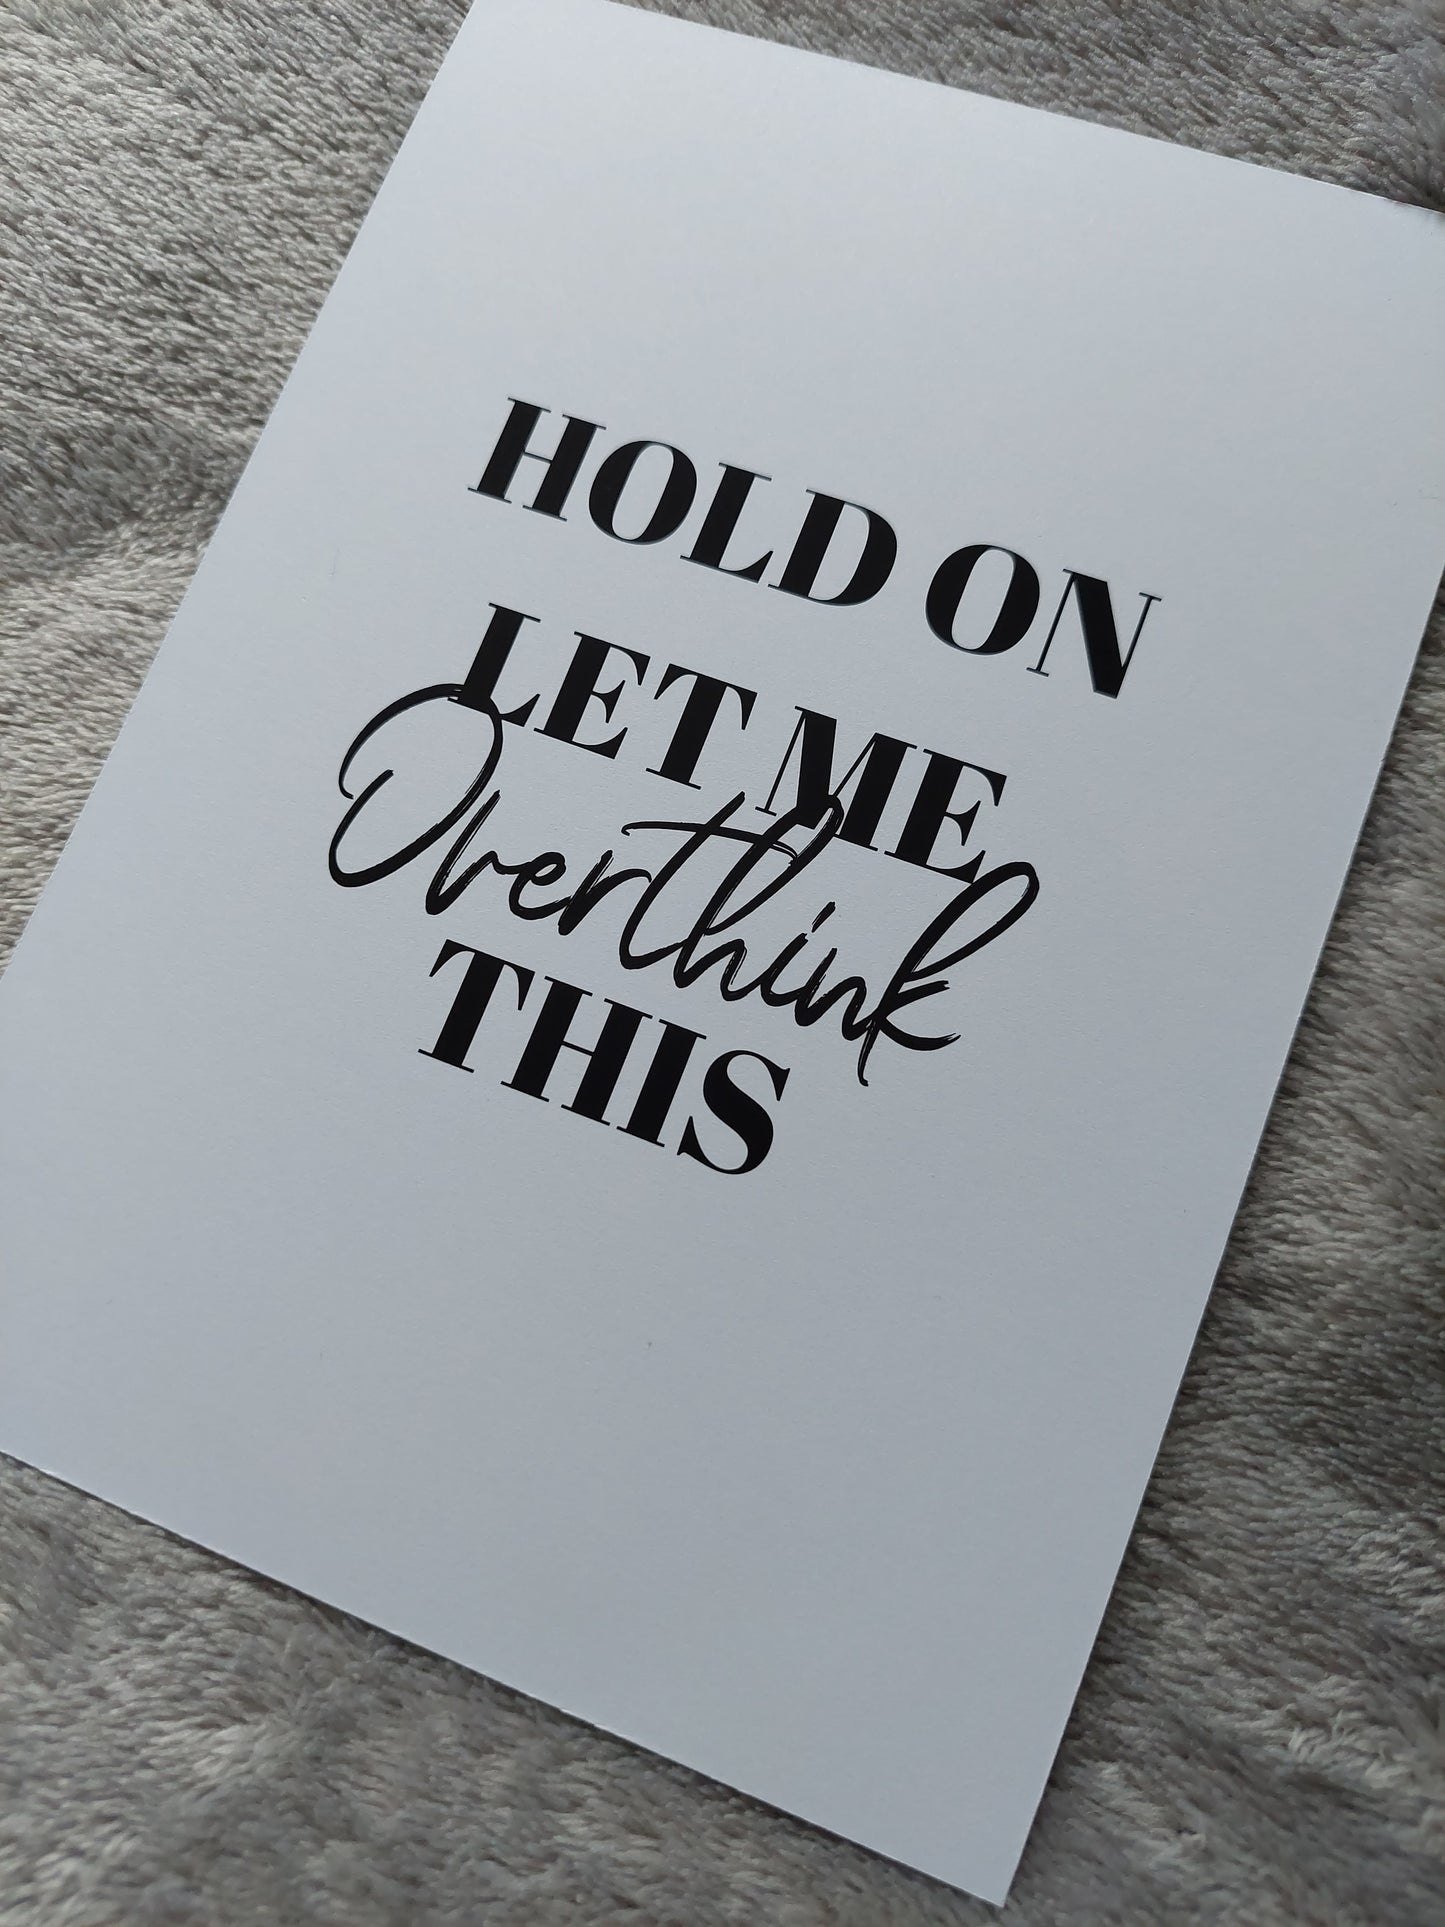 Quote Print | Hold On, Let Me Overthink This | Funny Print